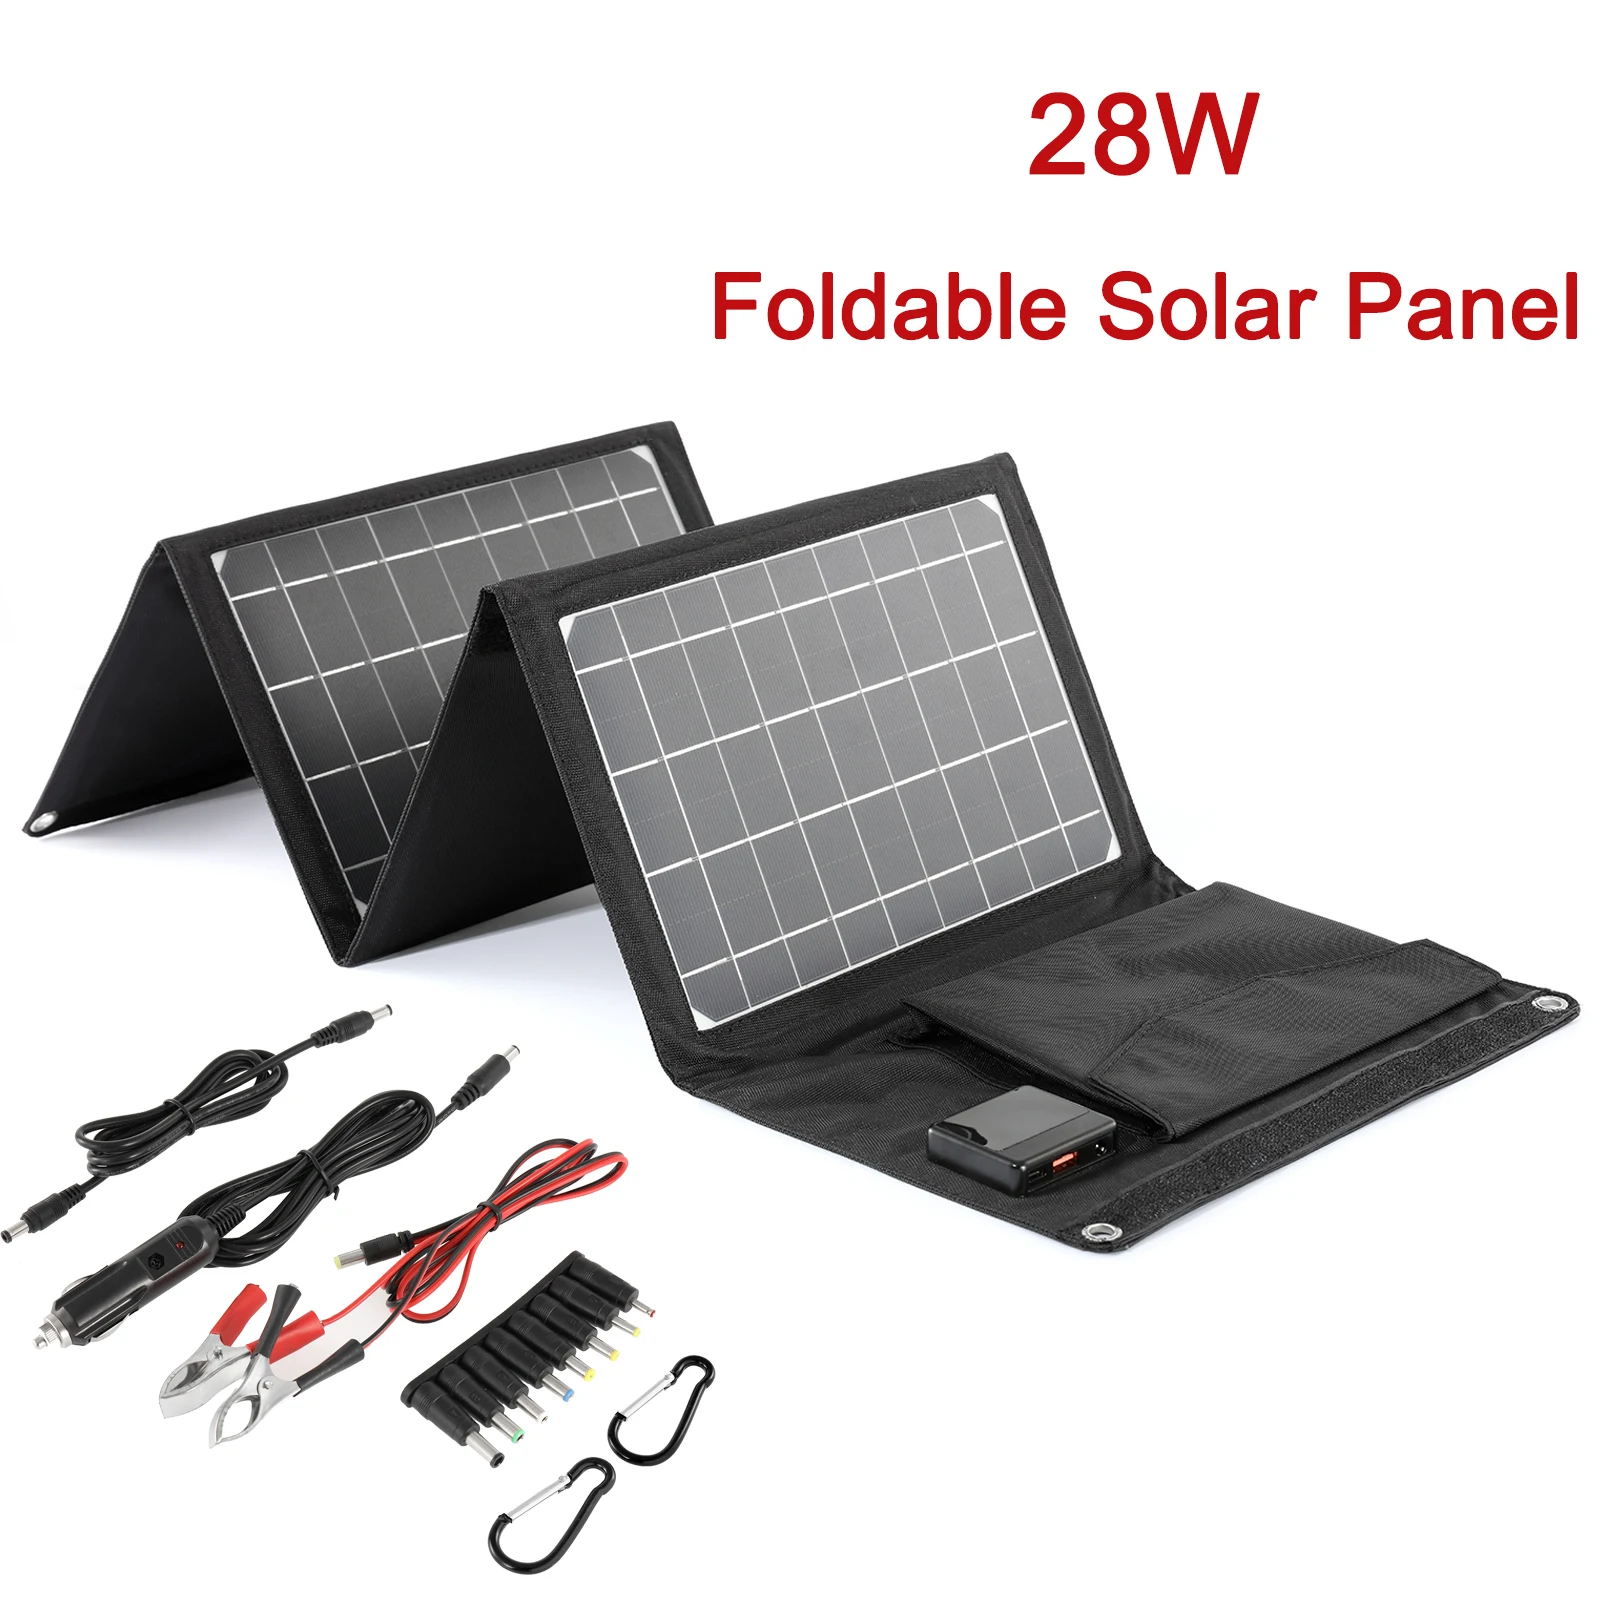 

28W Outdoor Sunpower Foldable Solar Panel Cells 18V USB Portable Solar Charger Battery For Mobile Phone Traveling Camping Hike